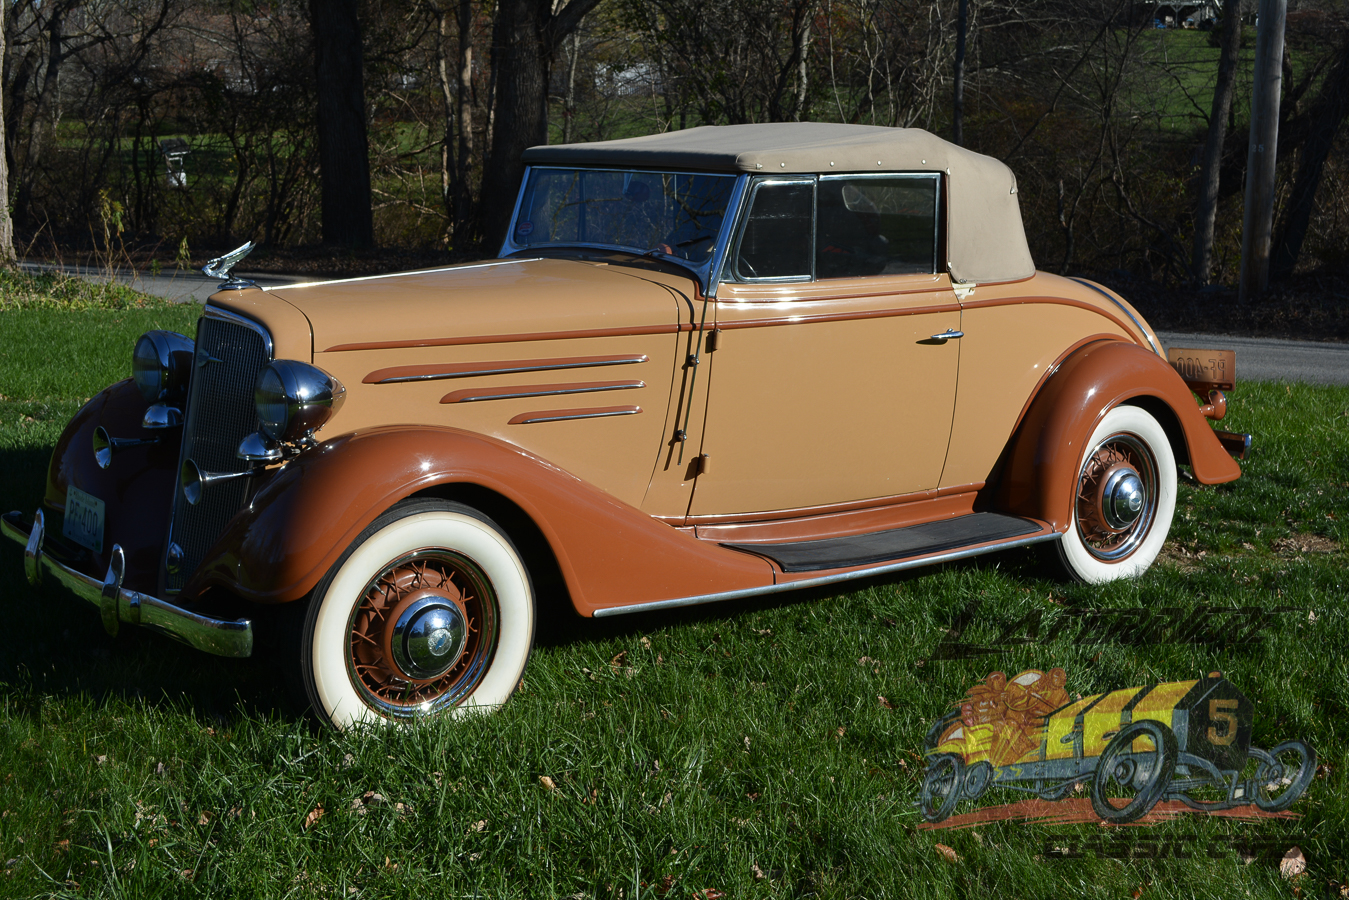 1934 Chevrolet Master Six Cabriolet - Laferriere Classic Cars